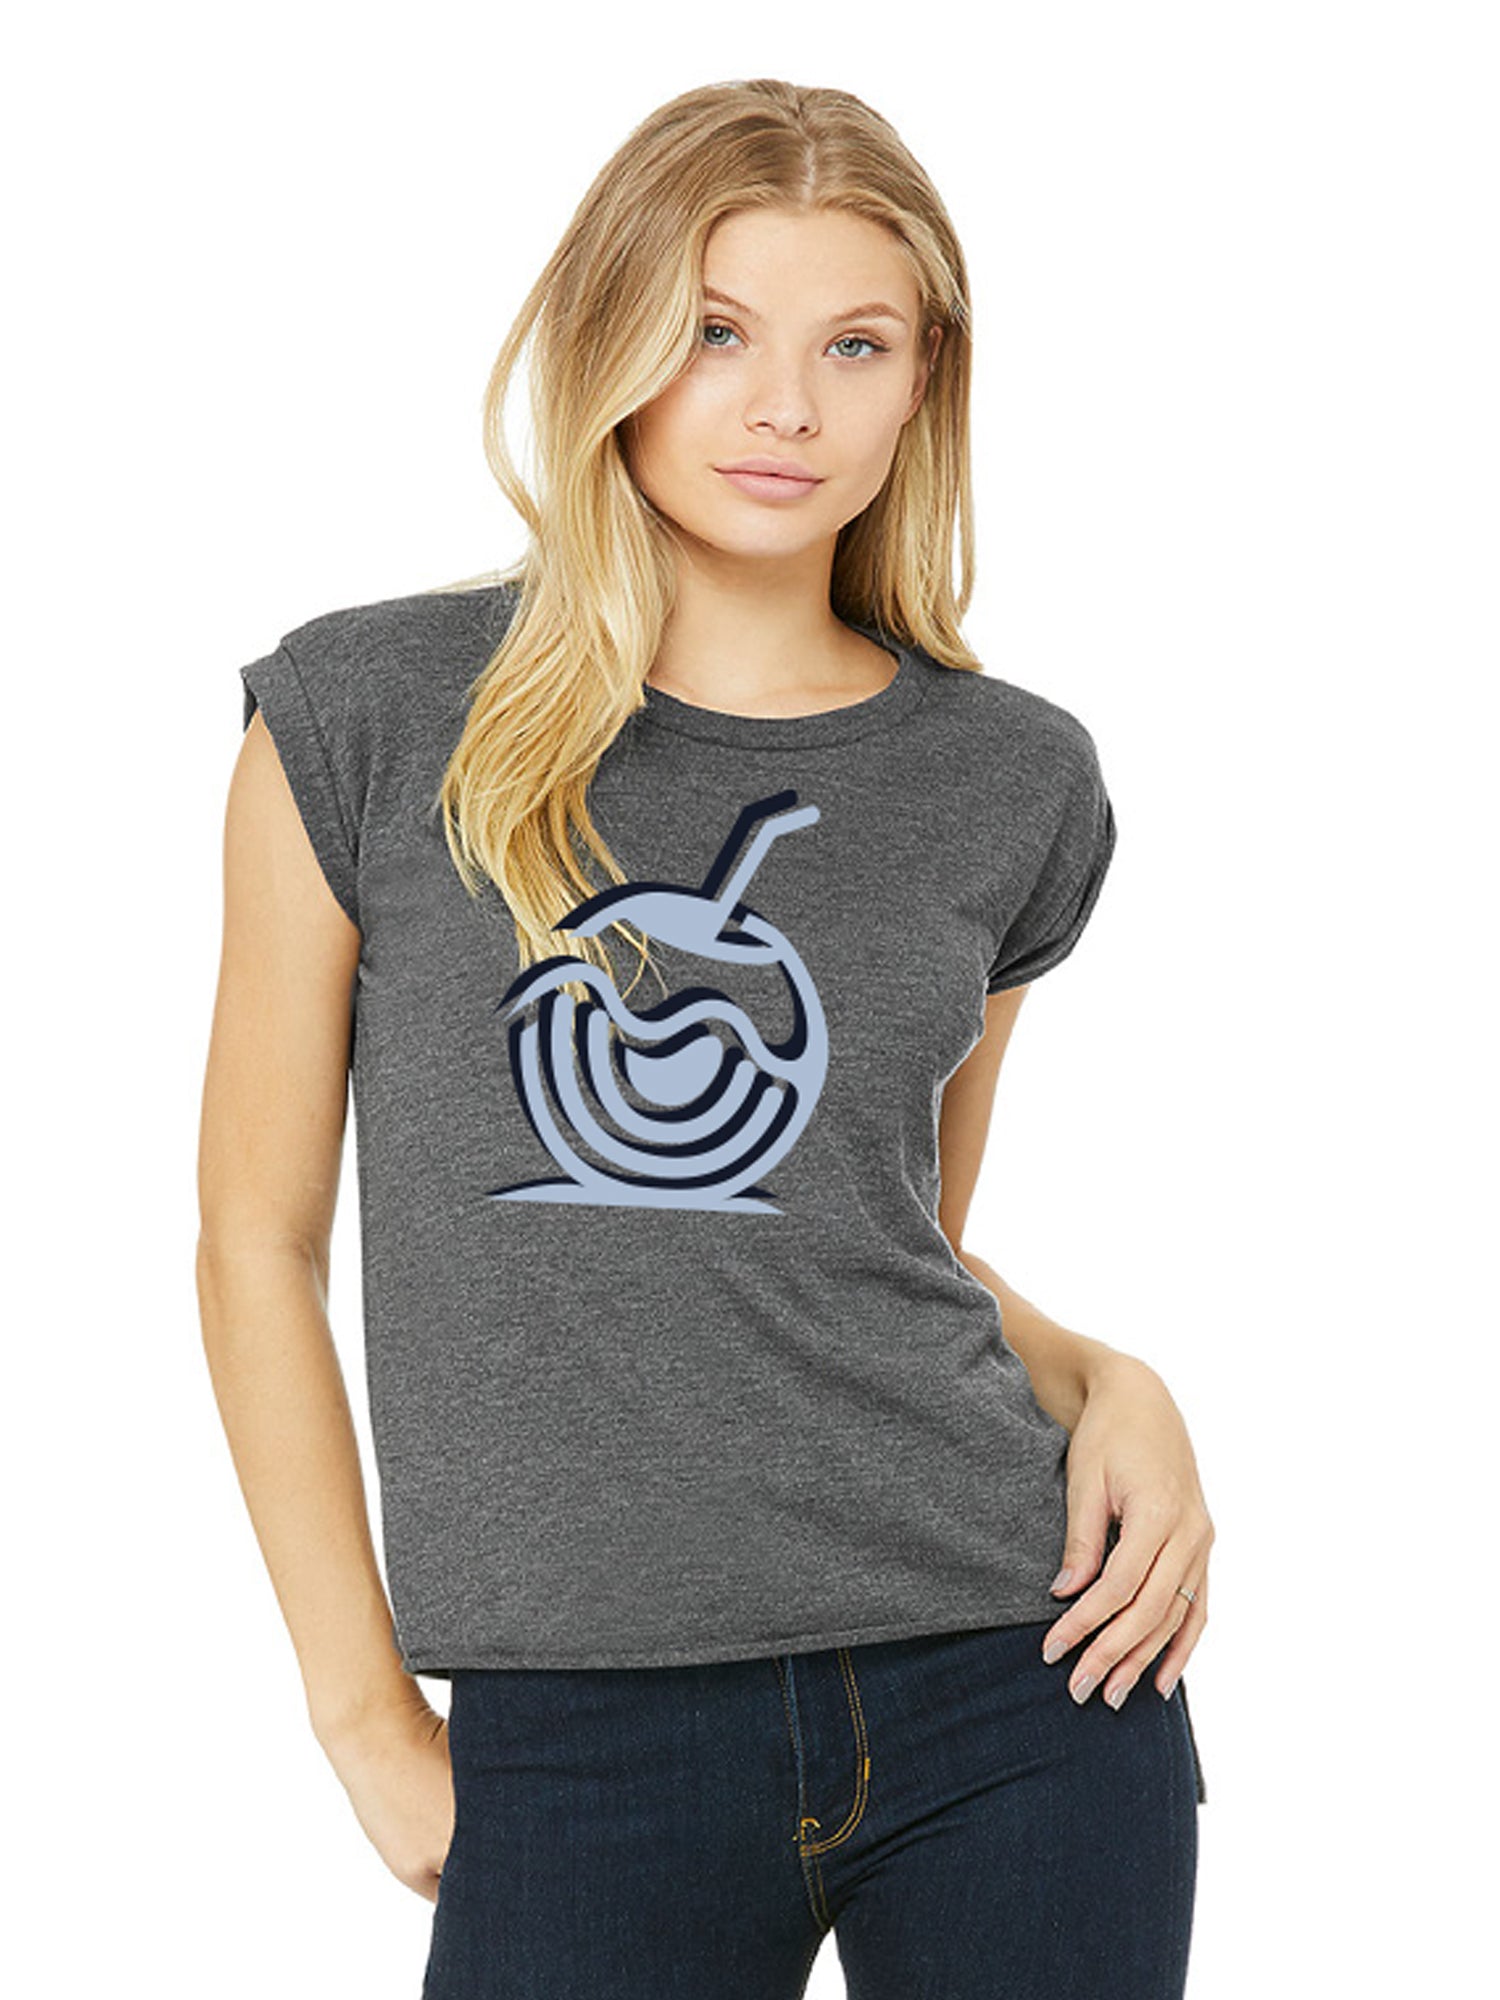 Coconut Vibes Graphic Women's Flowy Muscle Tee